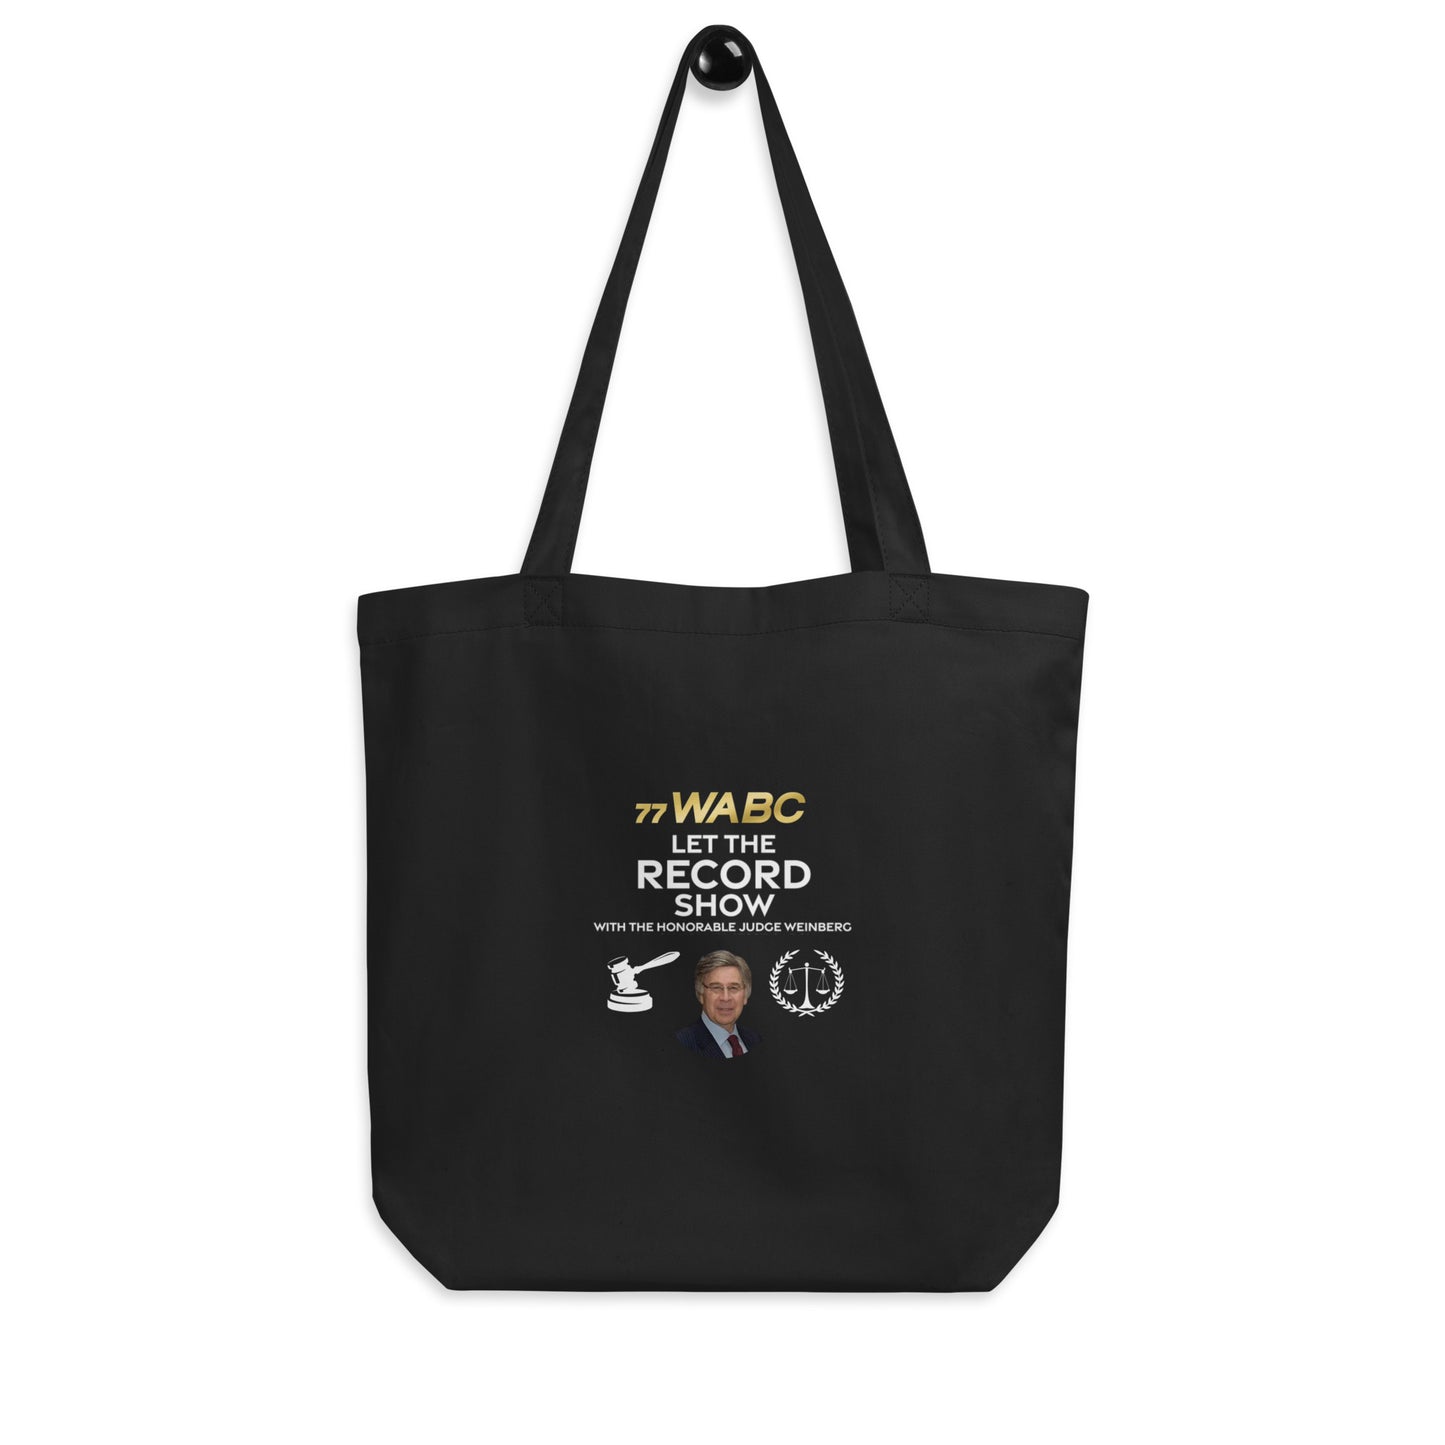 Let The Record Show Eco Tote Bag